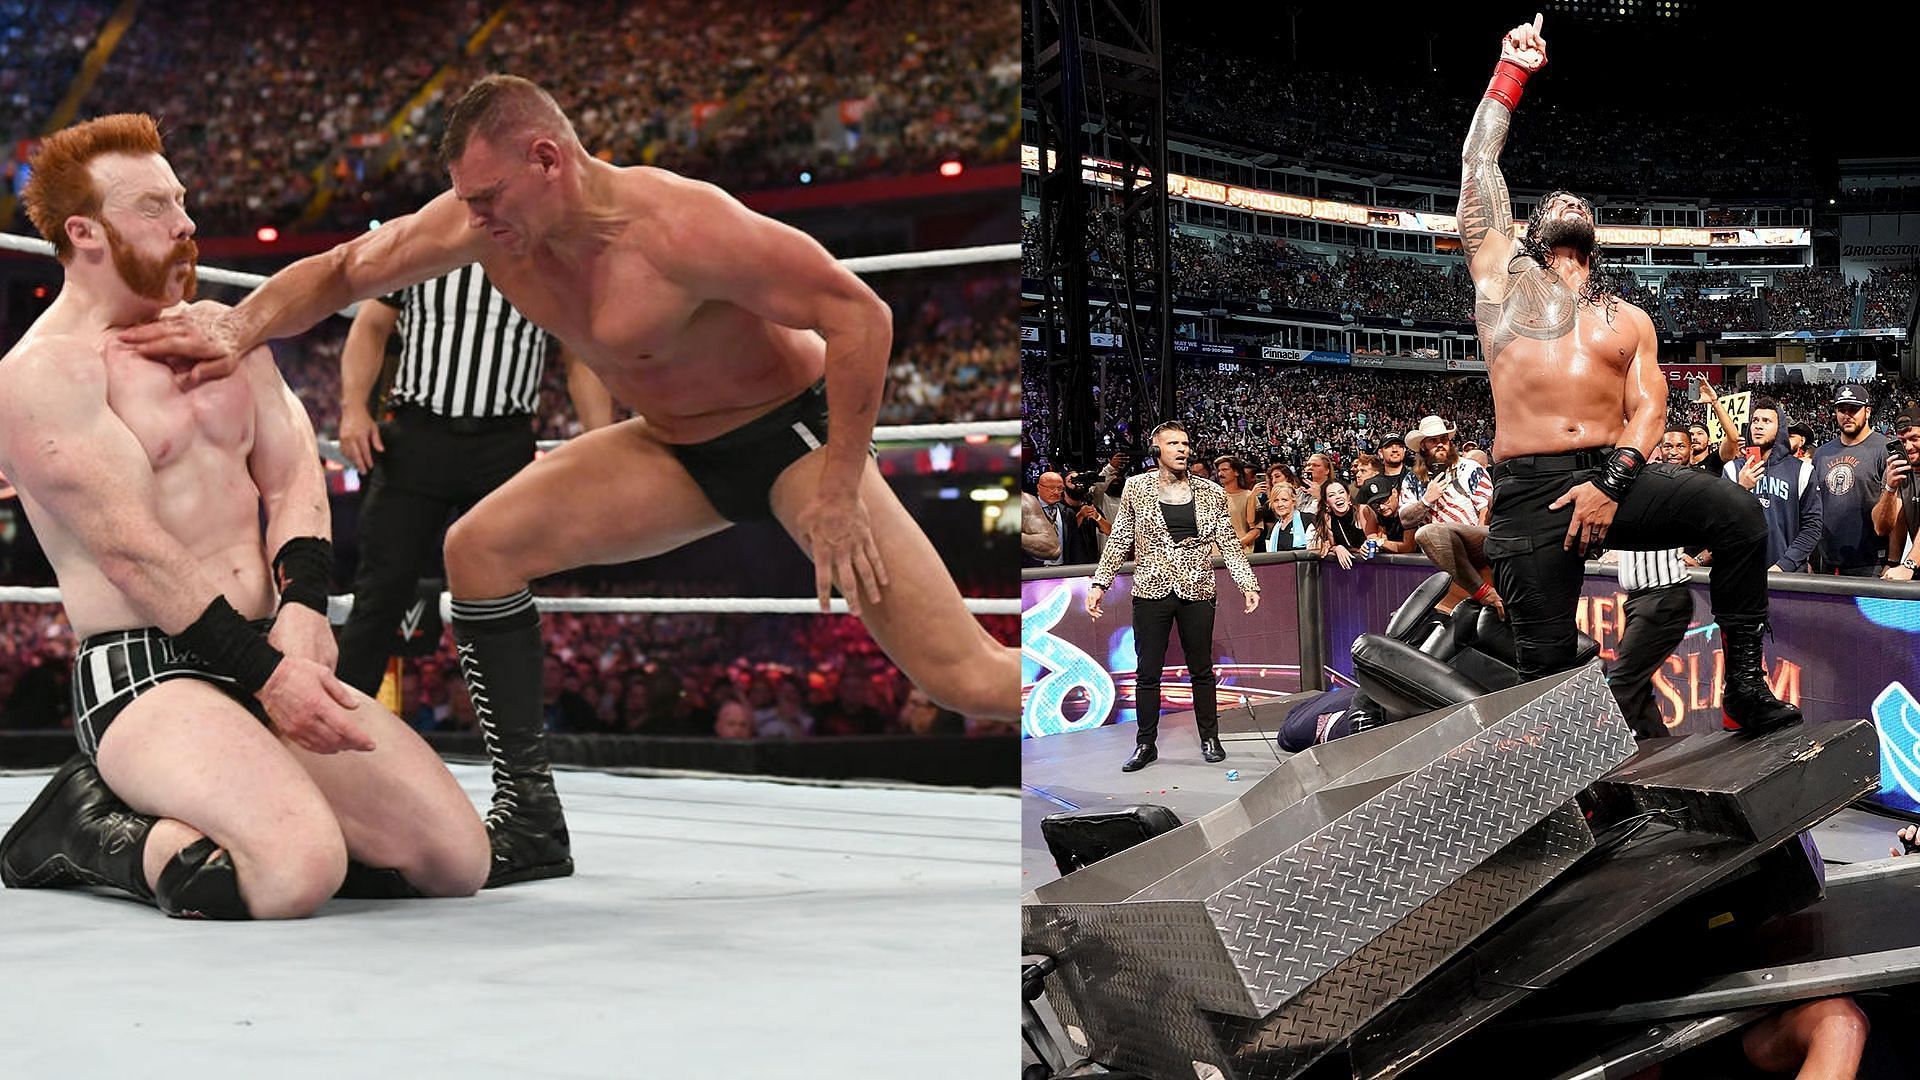 WWE fans have witnessed some incredible matches in 2022